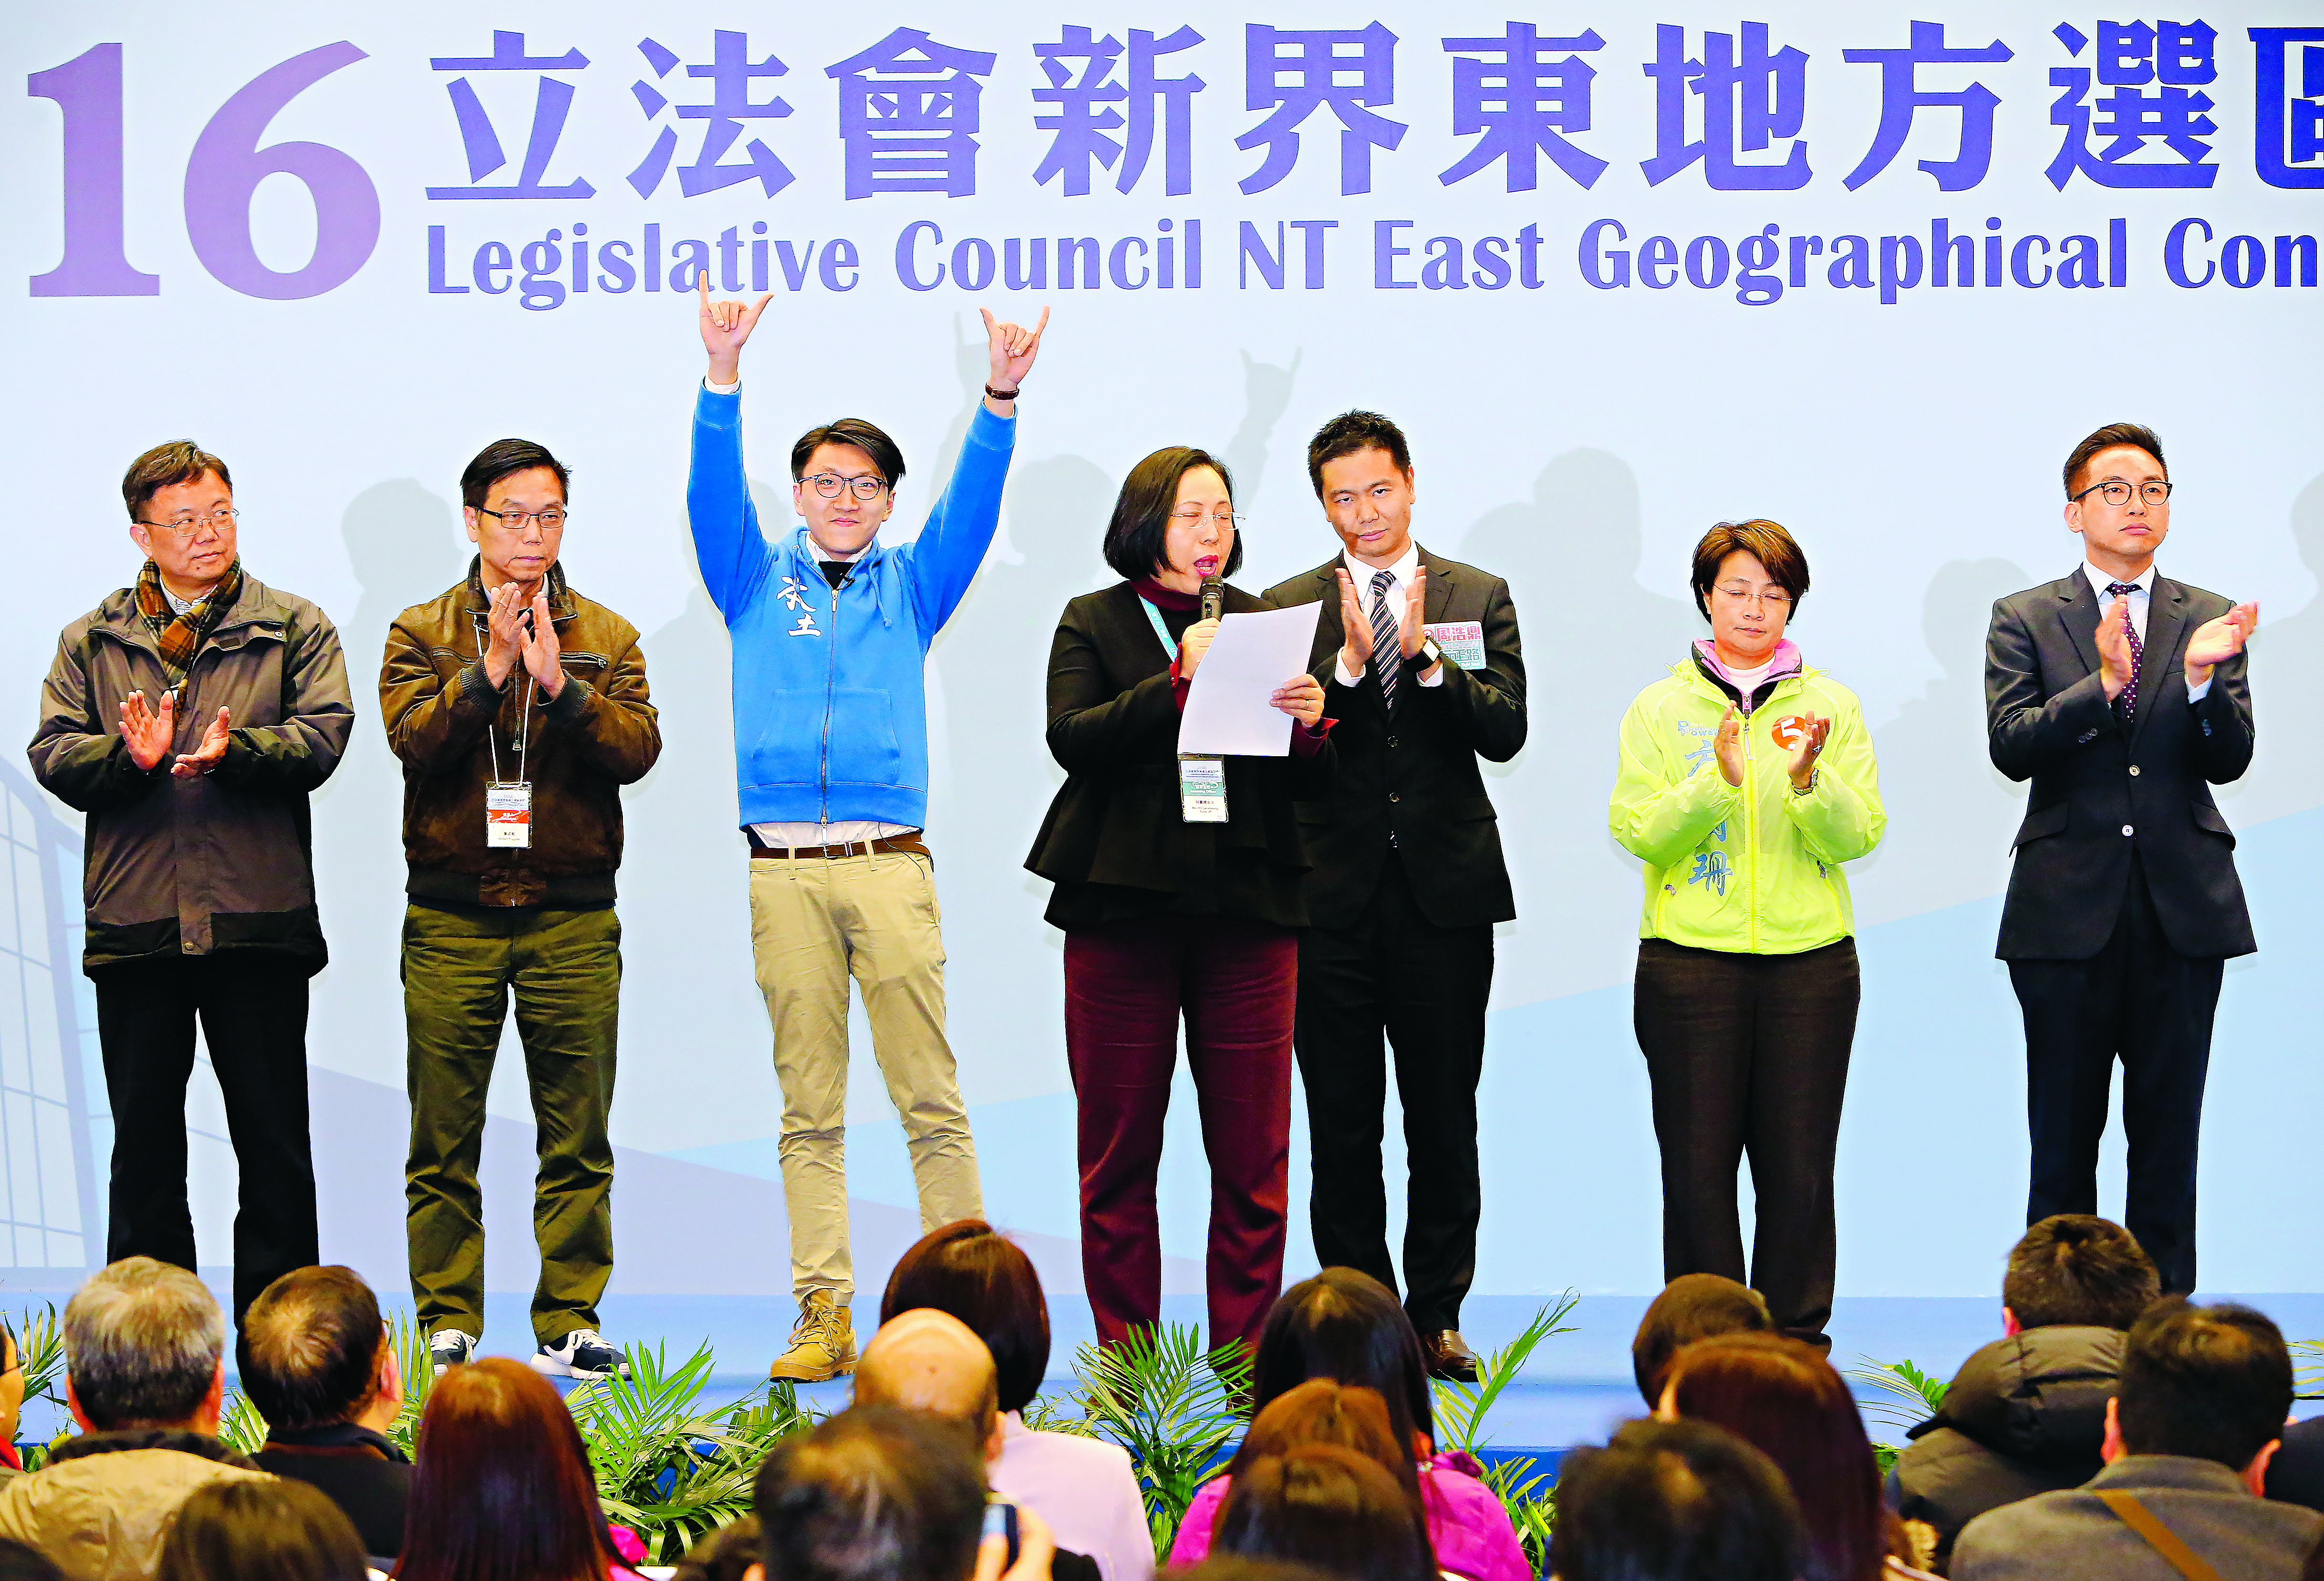 Edward Leung Tin-kei of Hong Kong Indigenous waves to the crowd as the result is announced. Photo: Dickson Lee